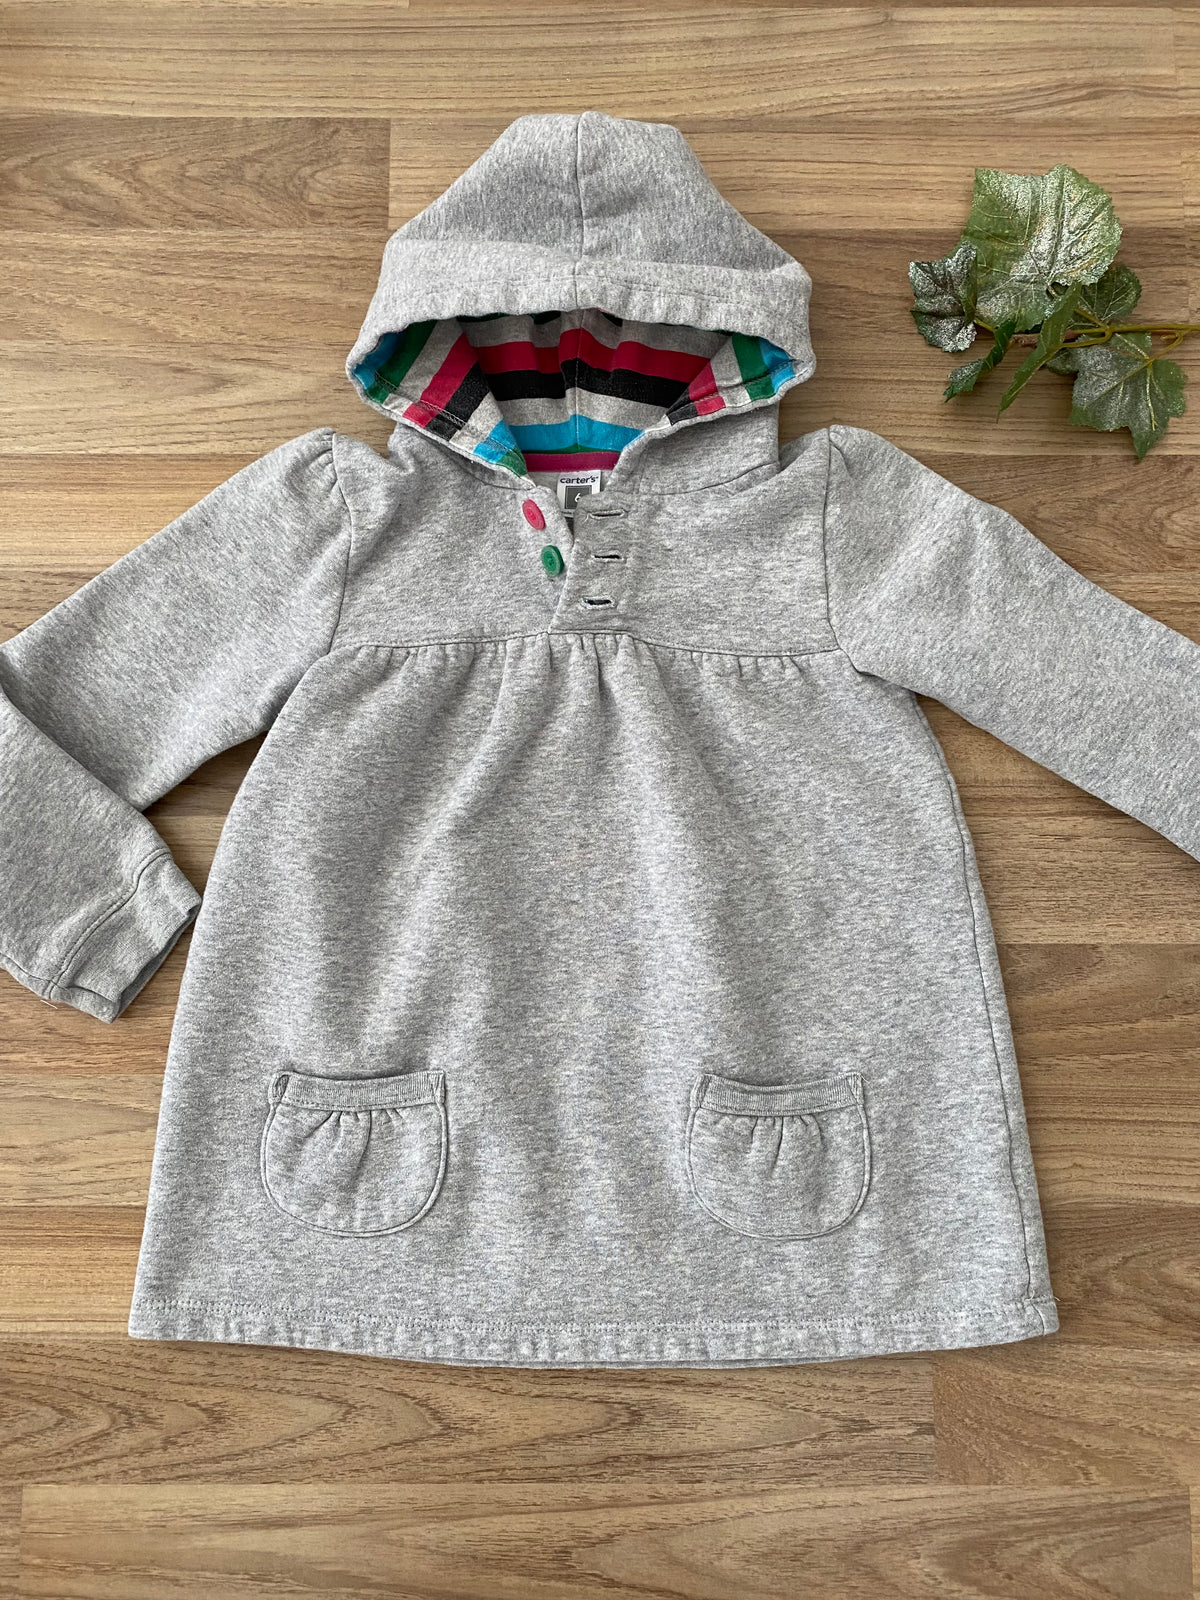 Pullover Sweater (Girls Size 6)